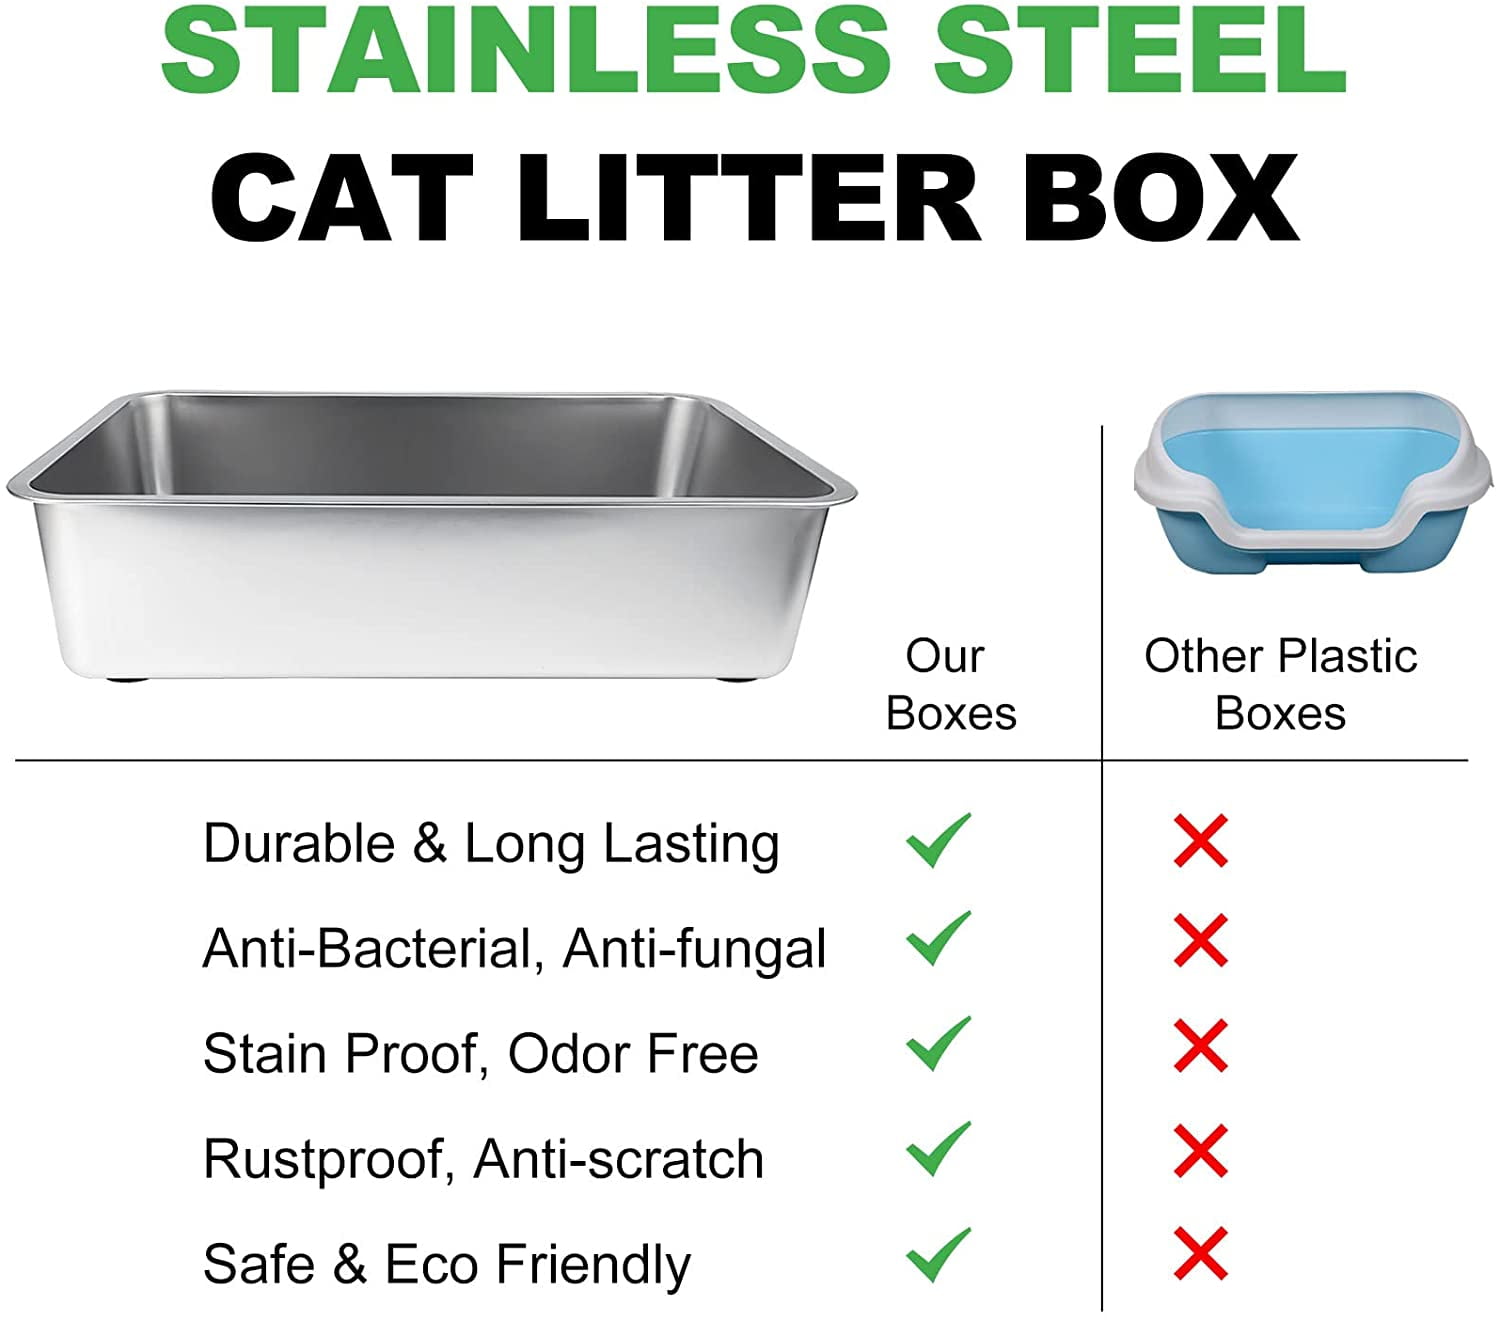 Easy to Clean,23.5L x 15.5W x 6H Rustproof Stainless Steel Cat Litter Box Never Absorbs Odors,Stain Free Large Metal Litter Box for Cats Rabbits Non Stick Smooth Surface,Anti-slip Rubber Feets 